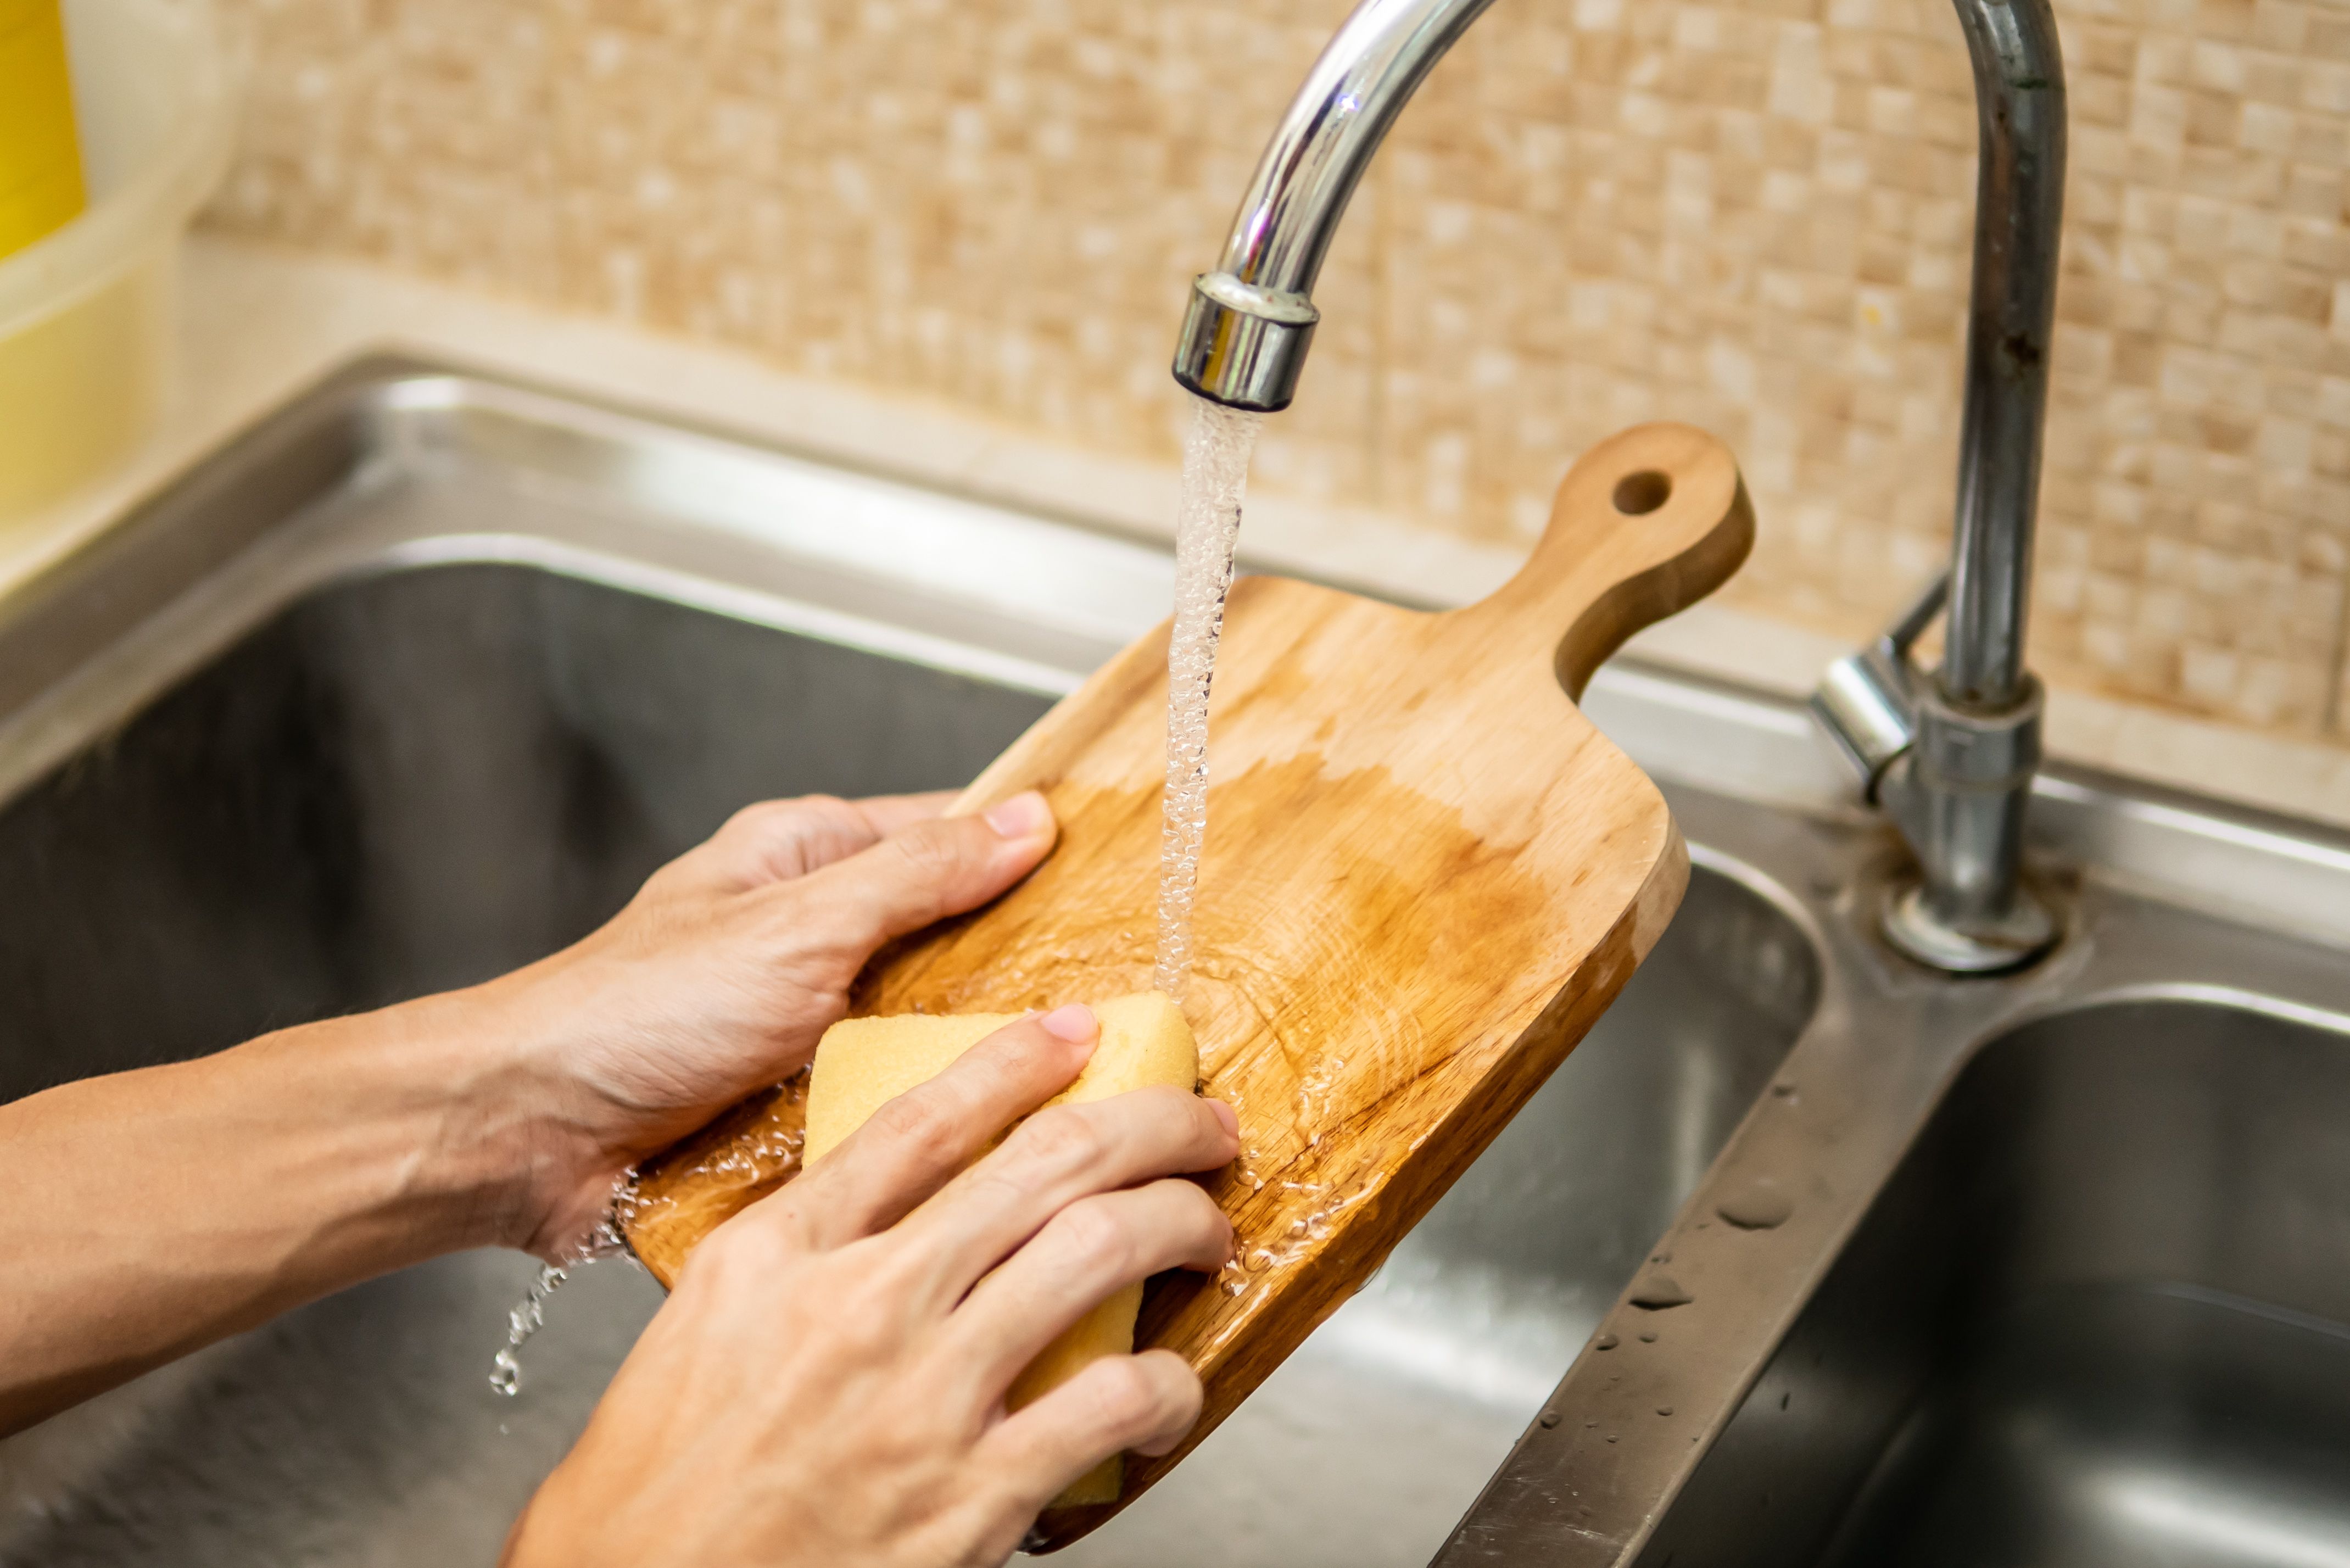 https://hips.hearstapps.com/hmg-prod/images/cleaning-wood-cutting-board-in-kitchen-sink-royalty-free-image-1583340534.jpg